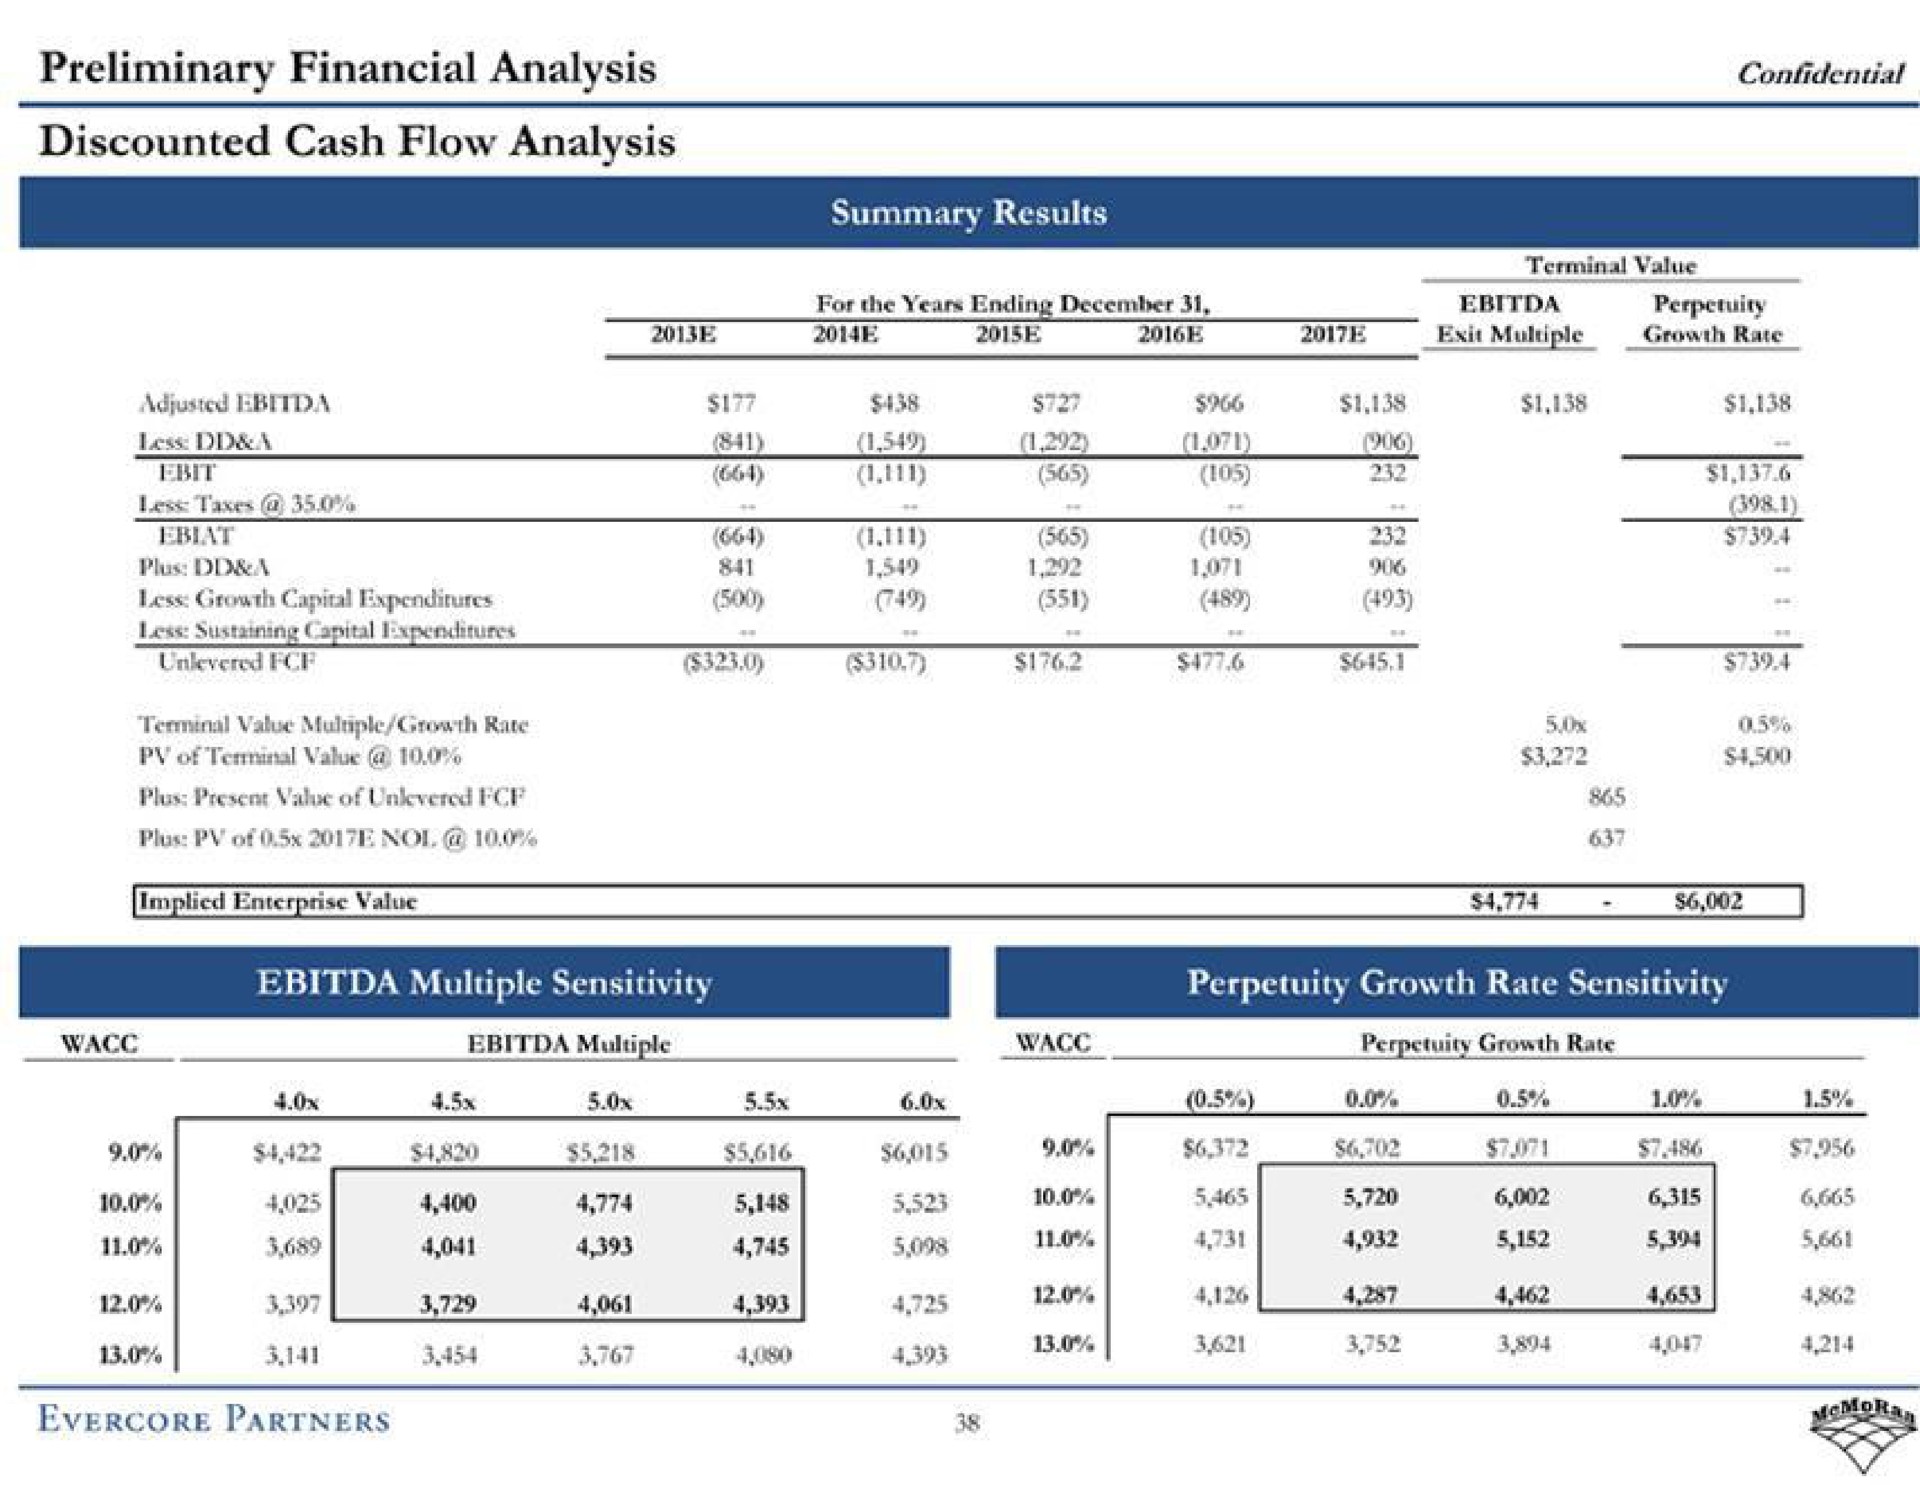 confidential preliminary financial analysis discounted cash flow analysis terminal value | Evercore